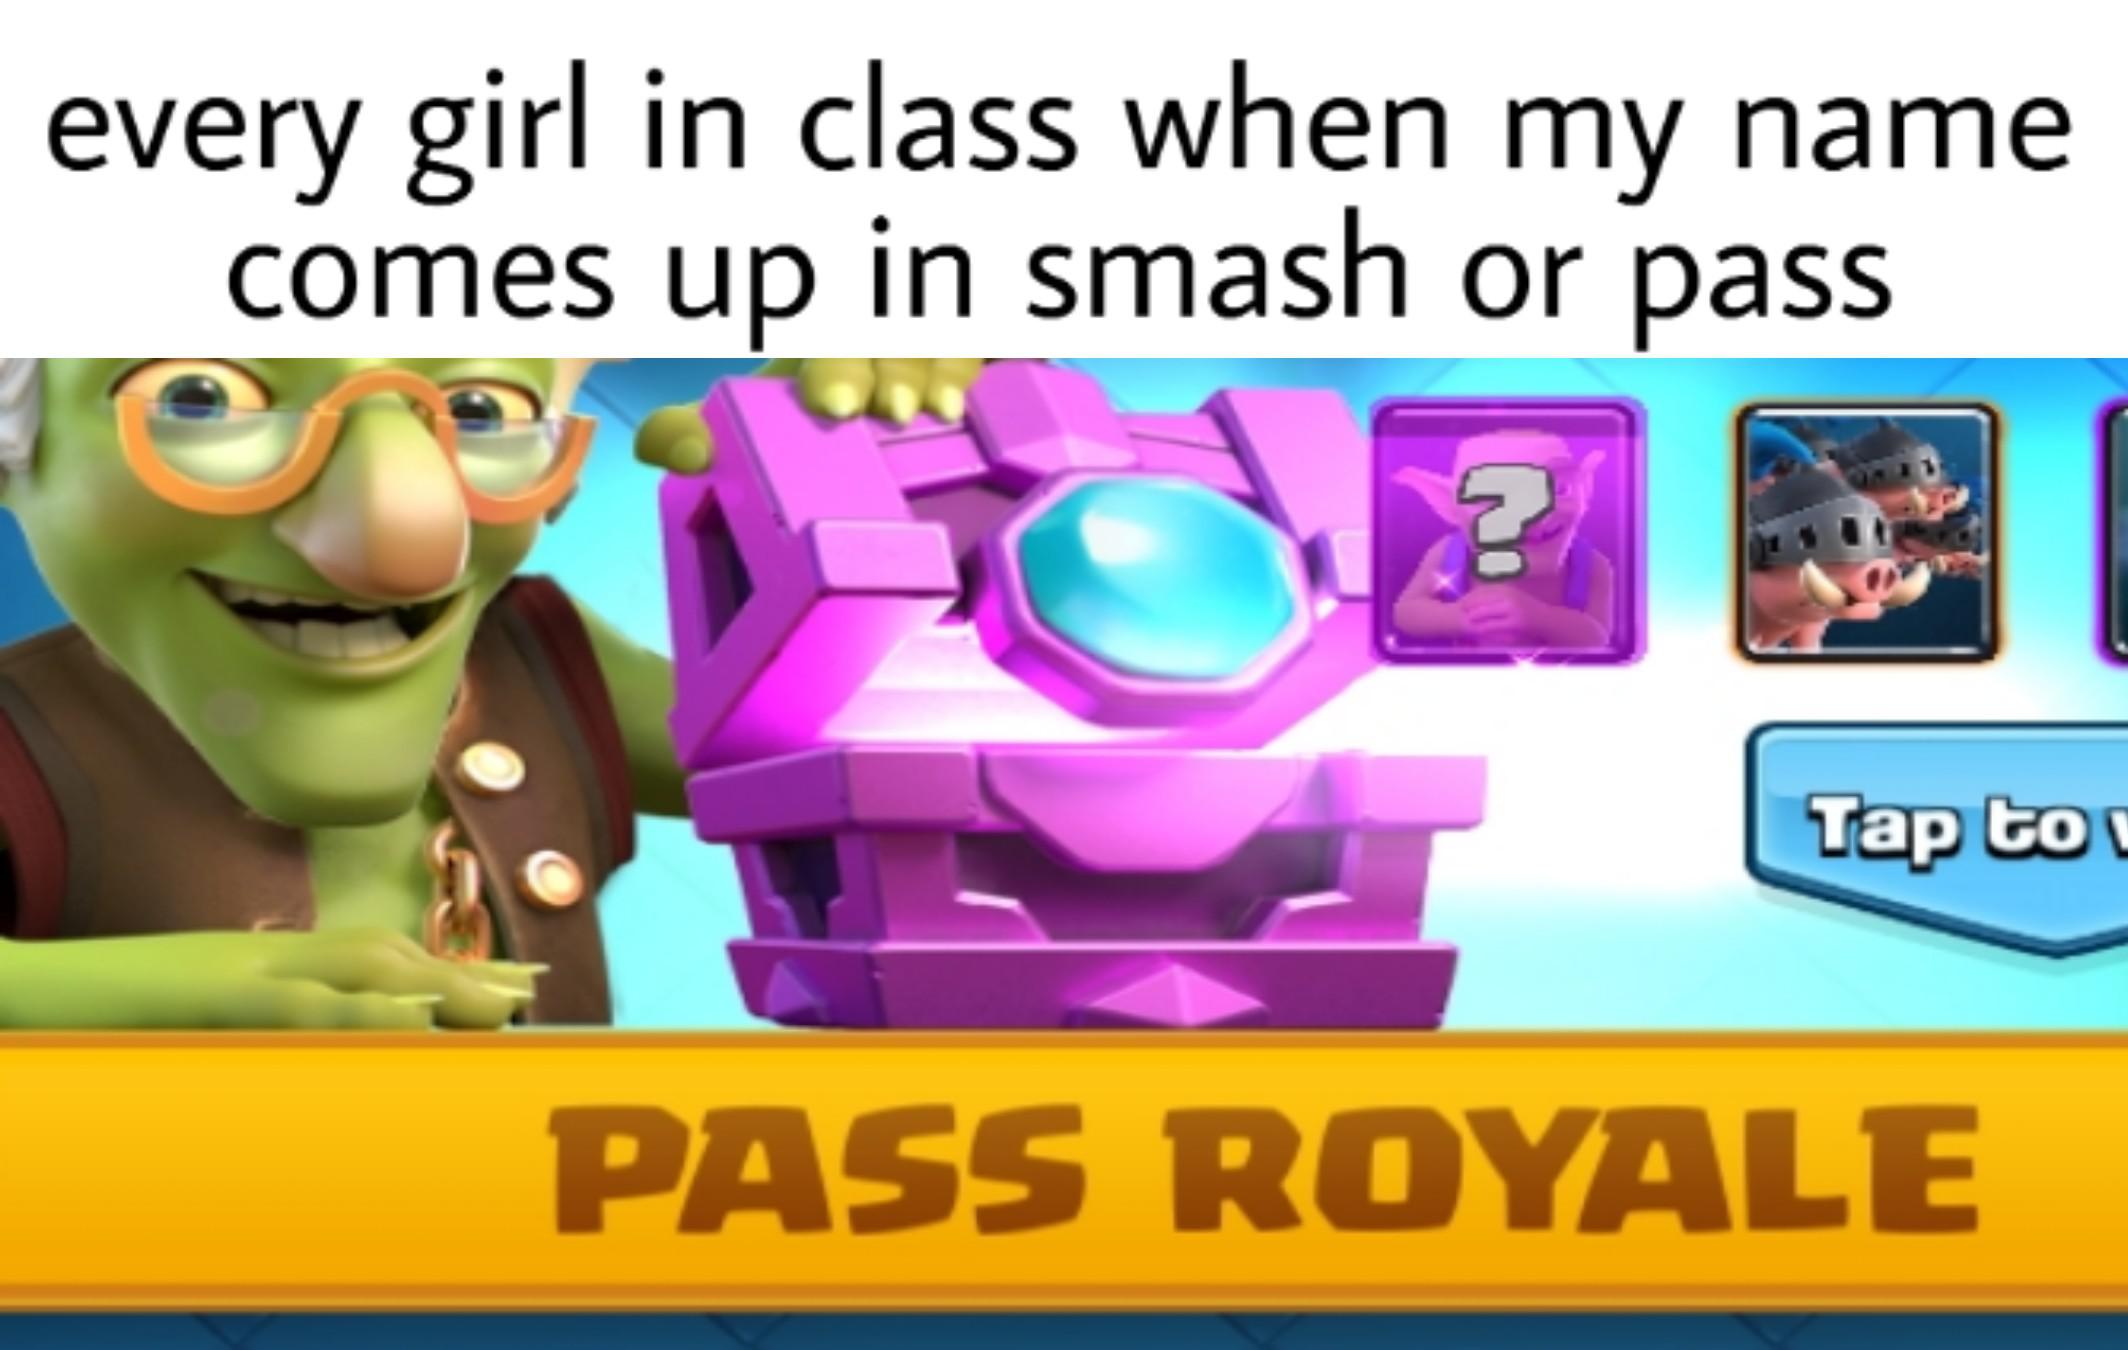 Dank Meme dank-memes cute text: every girl in class when my name comes up in smash or pass Tap bo PASS ROYALE 